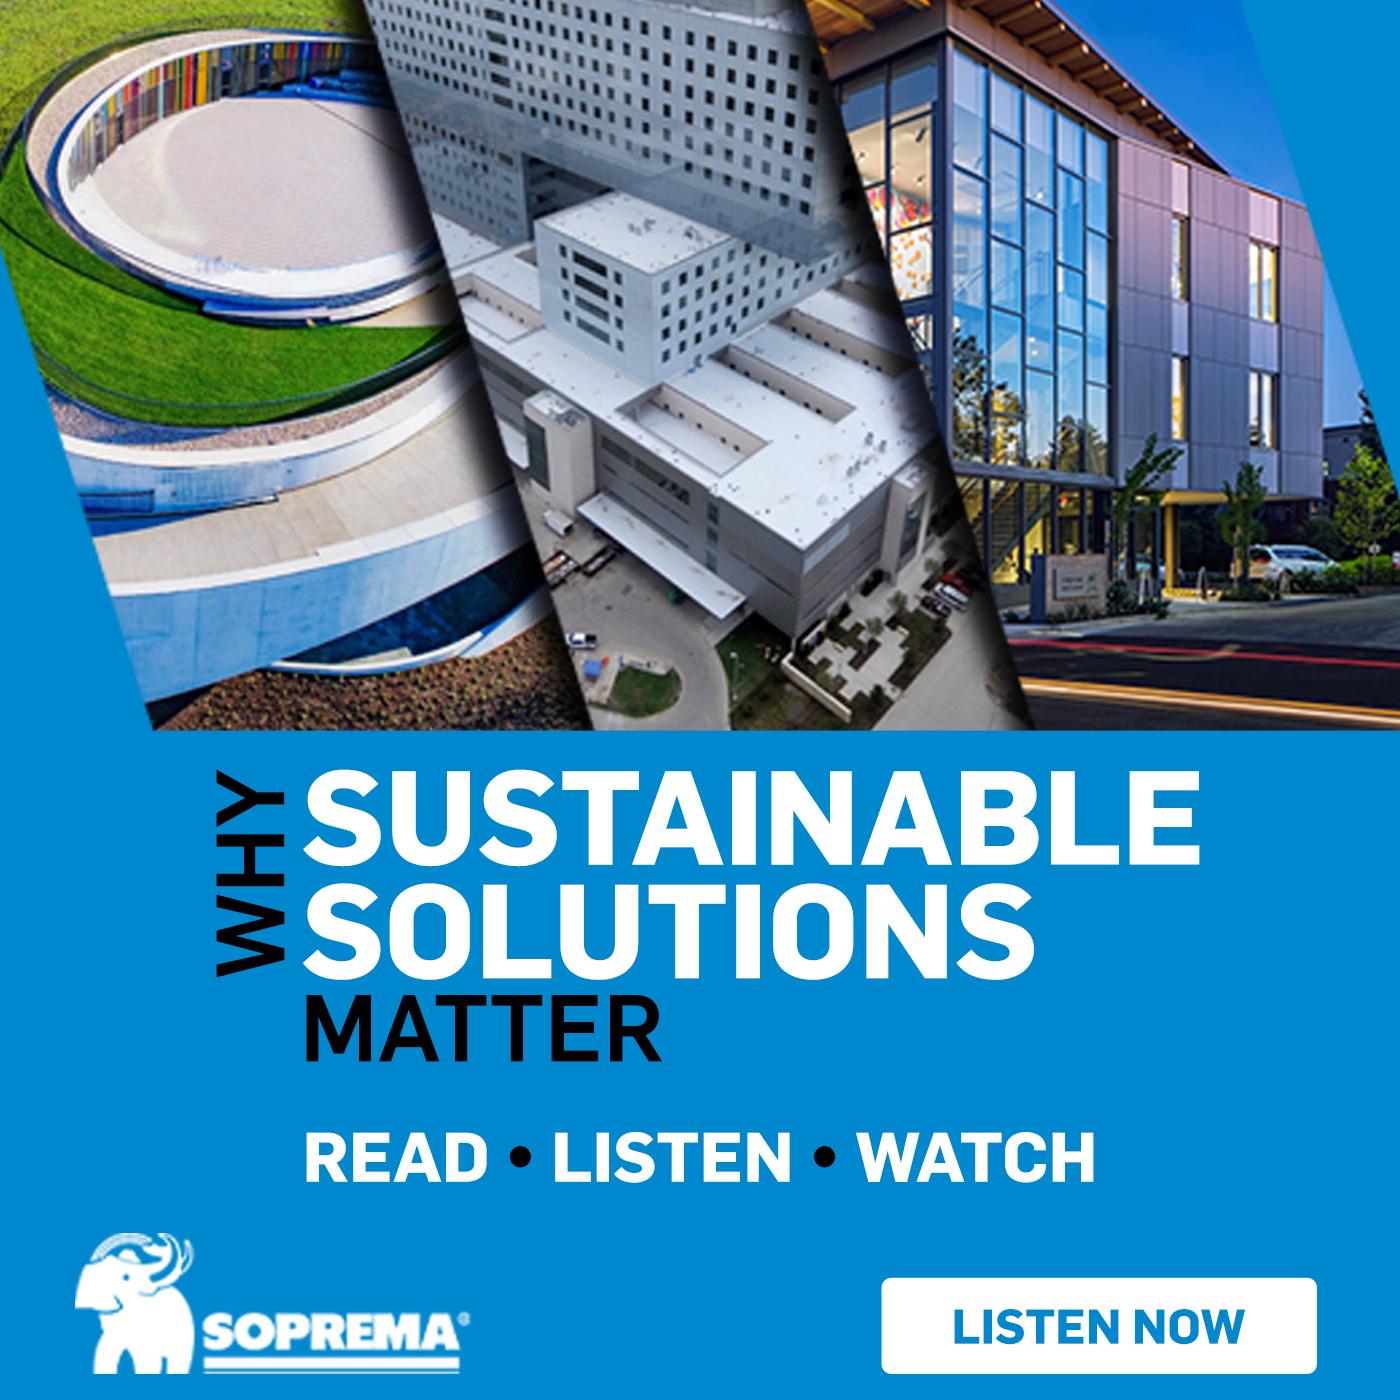 Soprema - RLW - Why Sustainable Solutions Matter - Pod